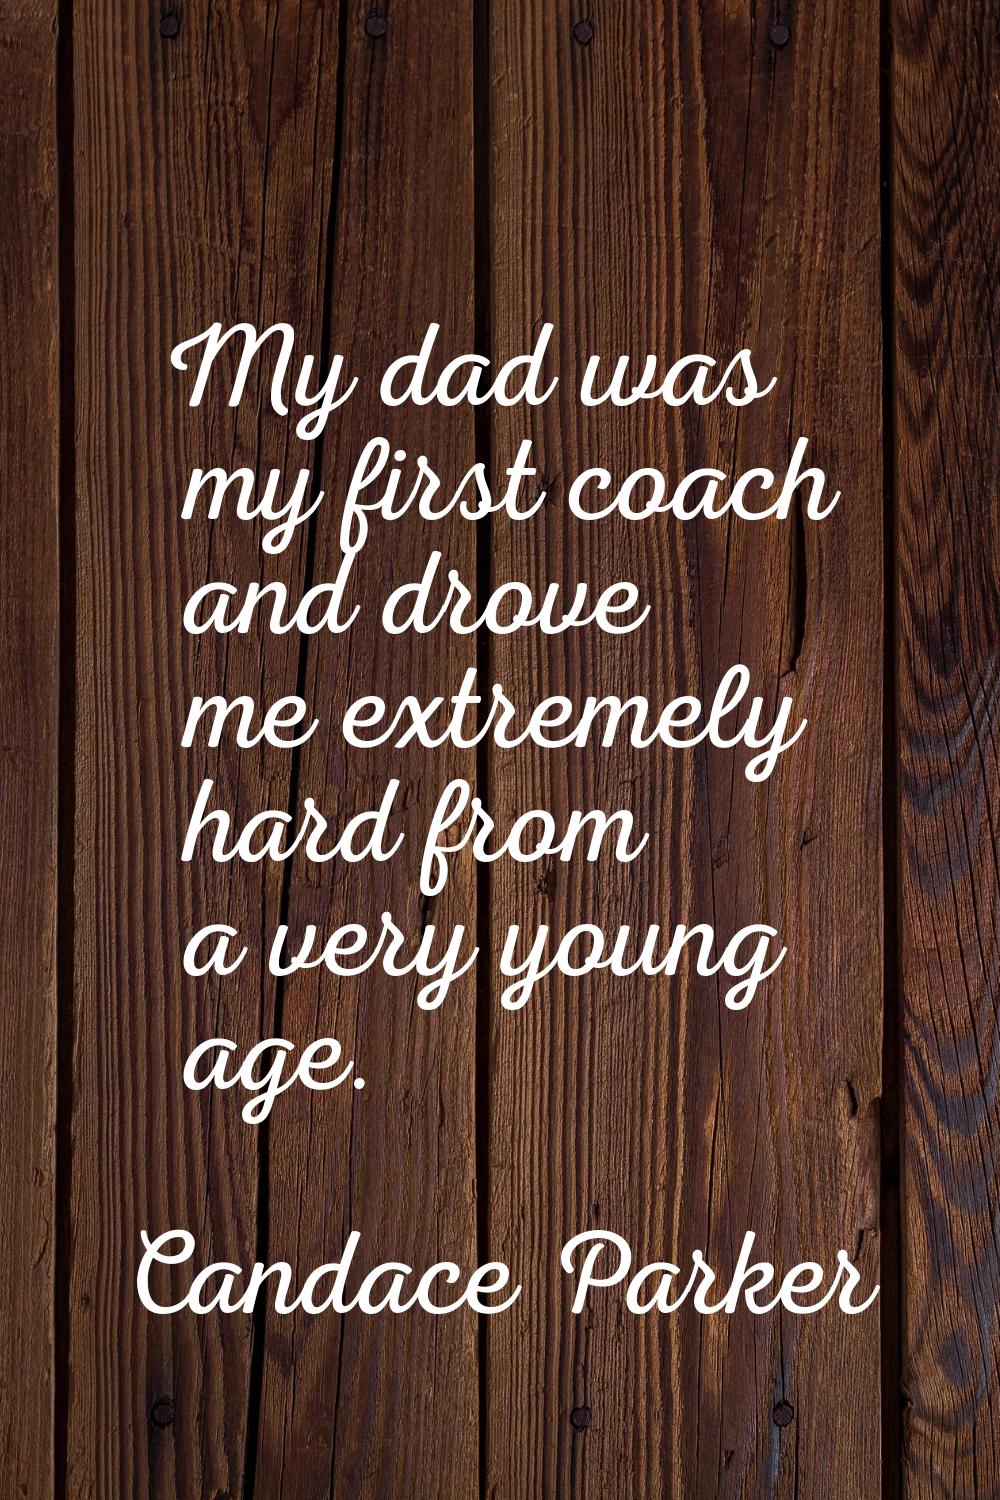 My dad was my first coach and drove me extremely hard from a very young age.